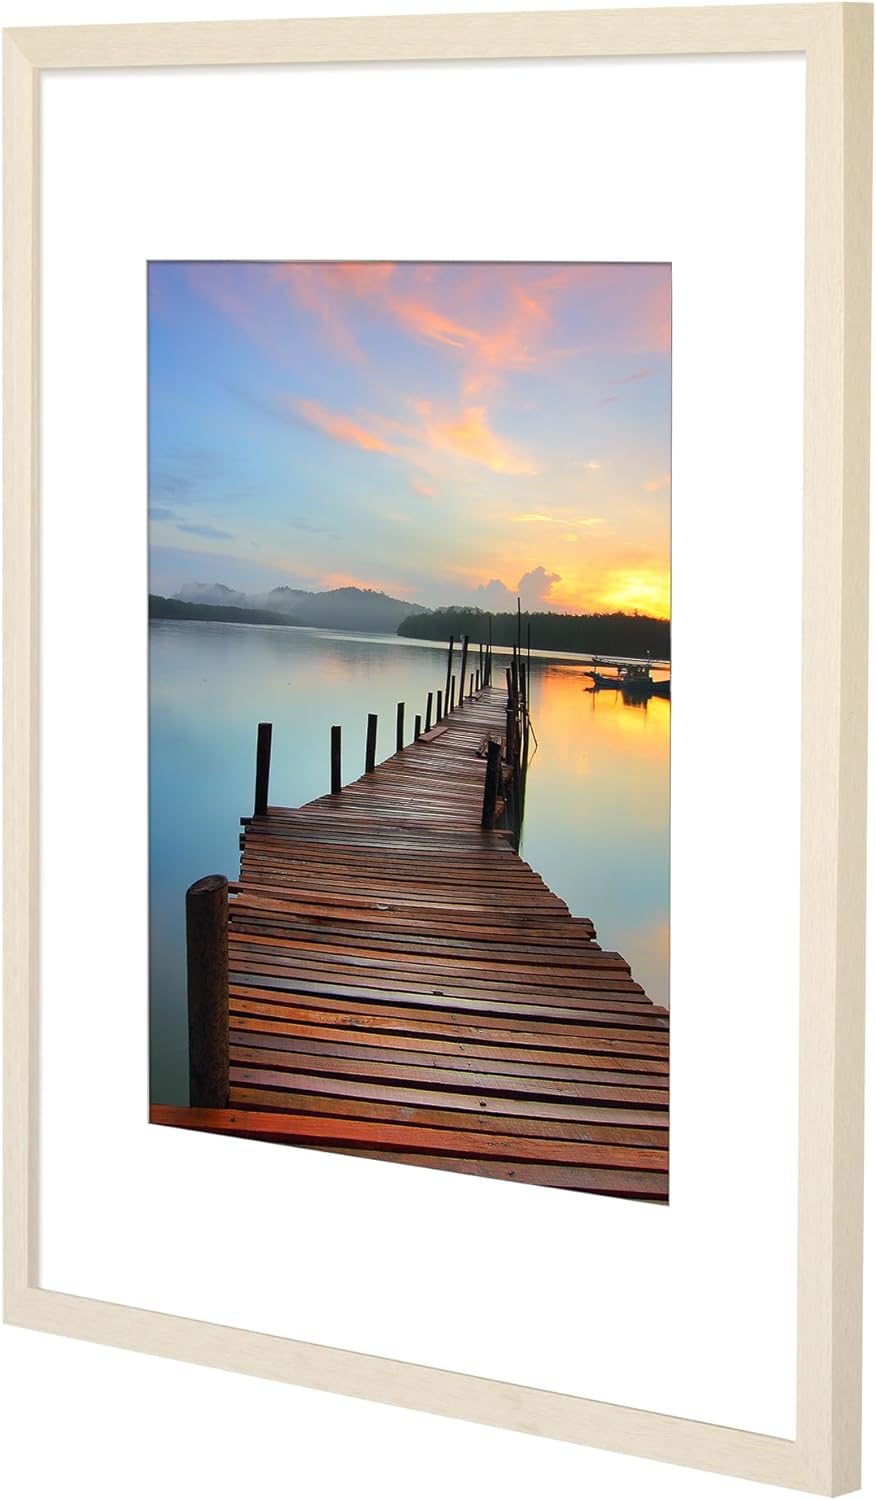 ENJOYBASICS 16x20 Picture Frame, Display Poster 11x14 with Mat or 16 x 20  Without Mat, Wall Gallery Photo Frames, Black, 2 Pack